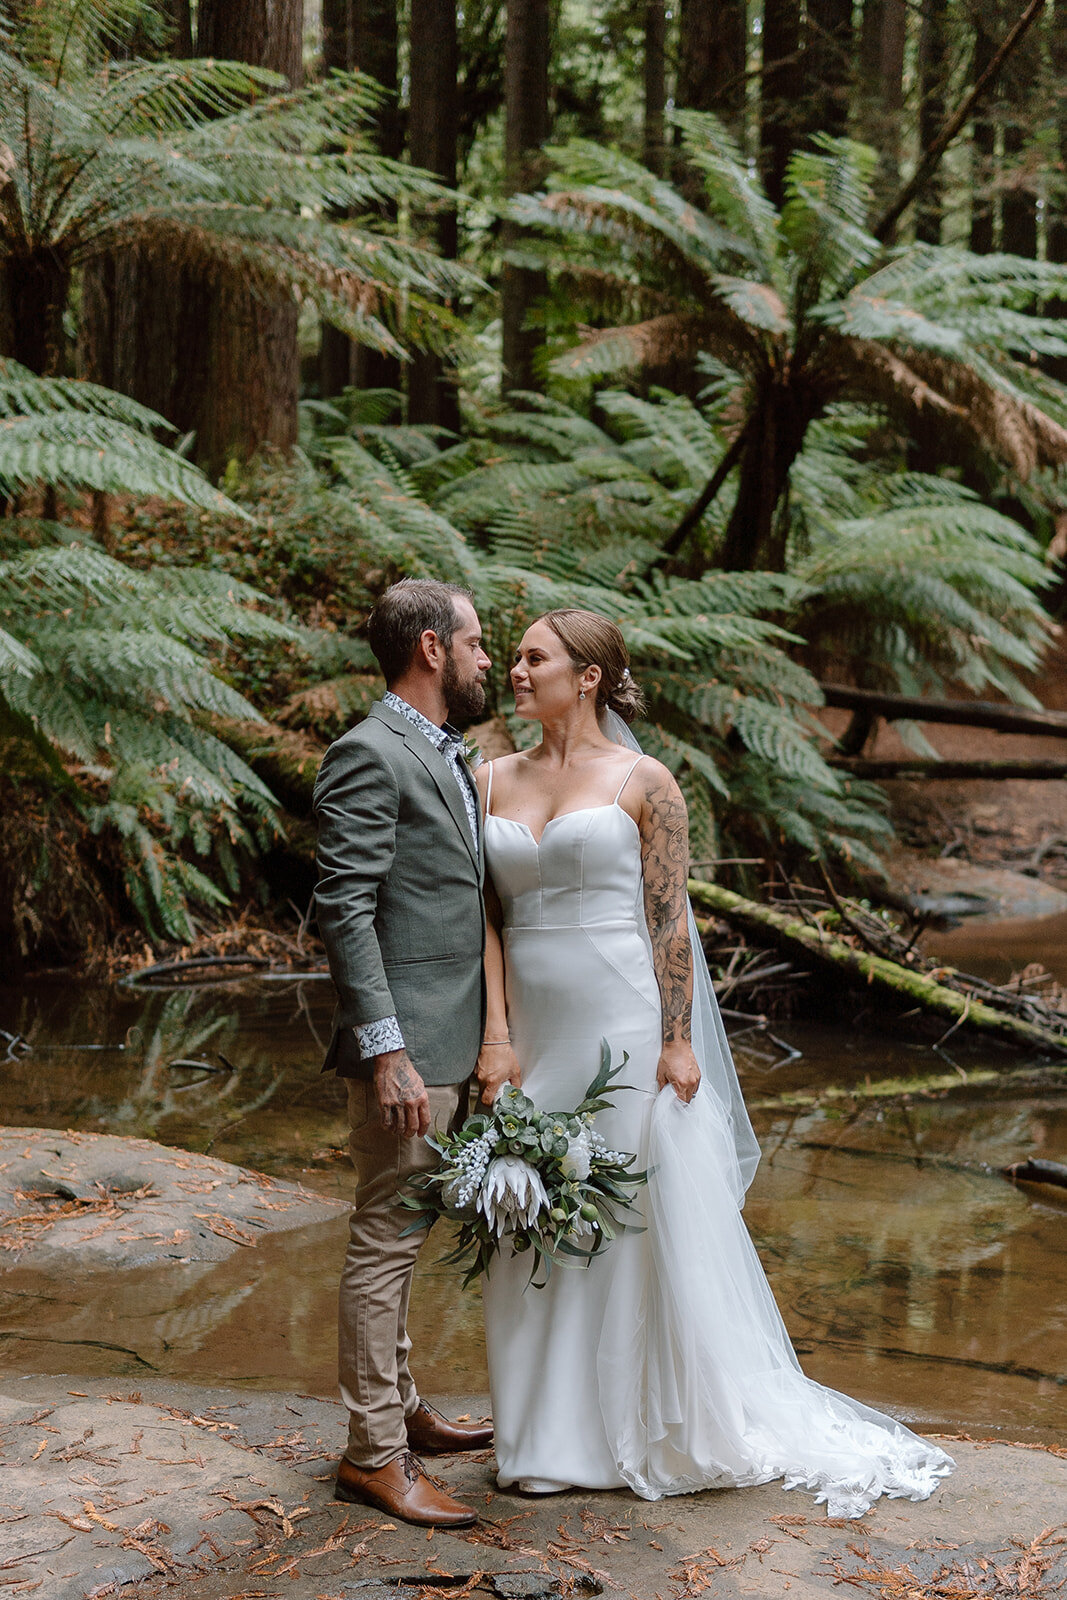 Stacey&Cory-Coast&Pines-371